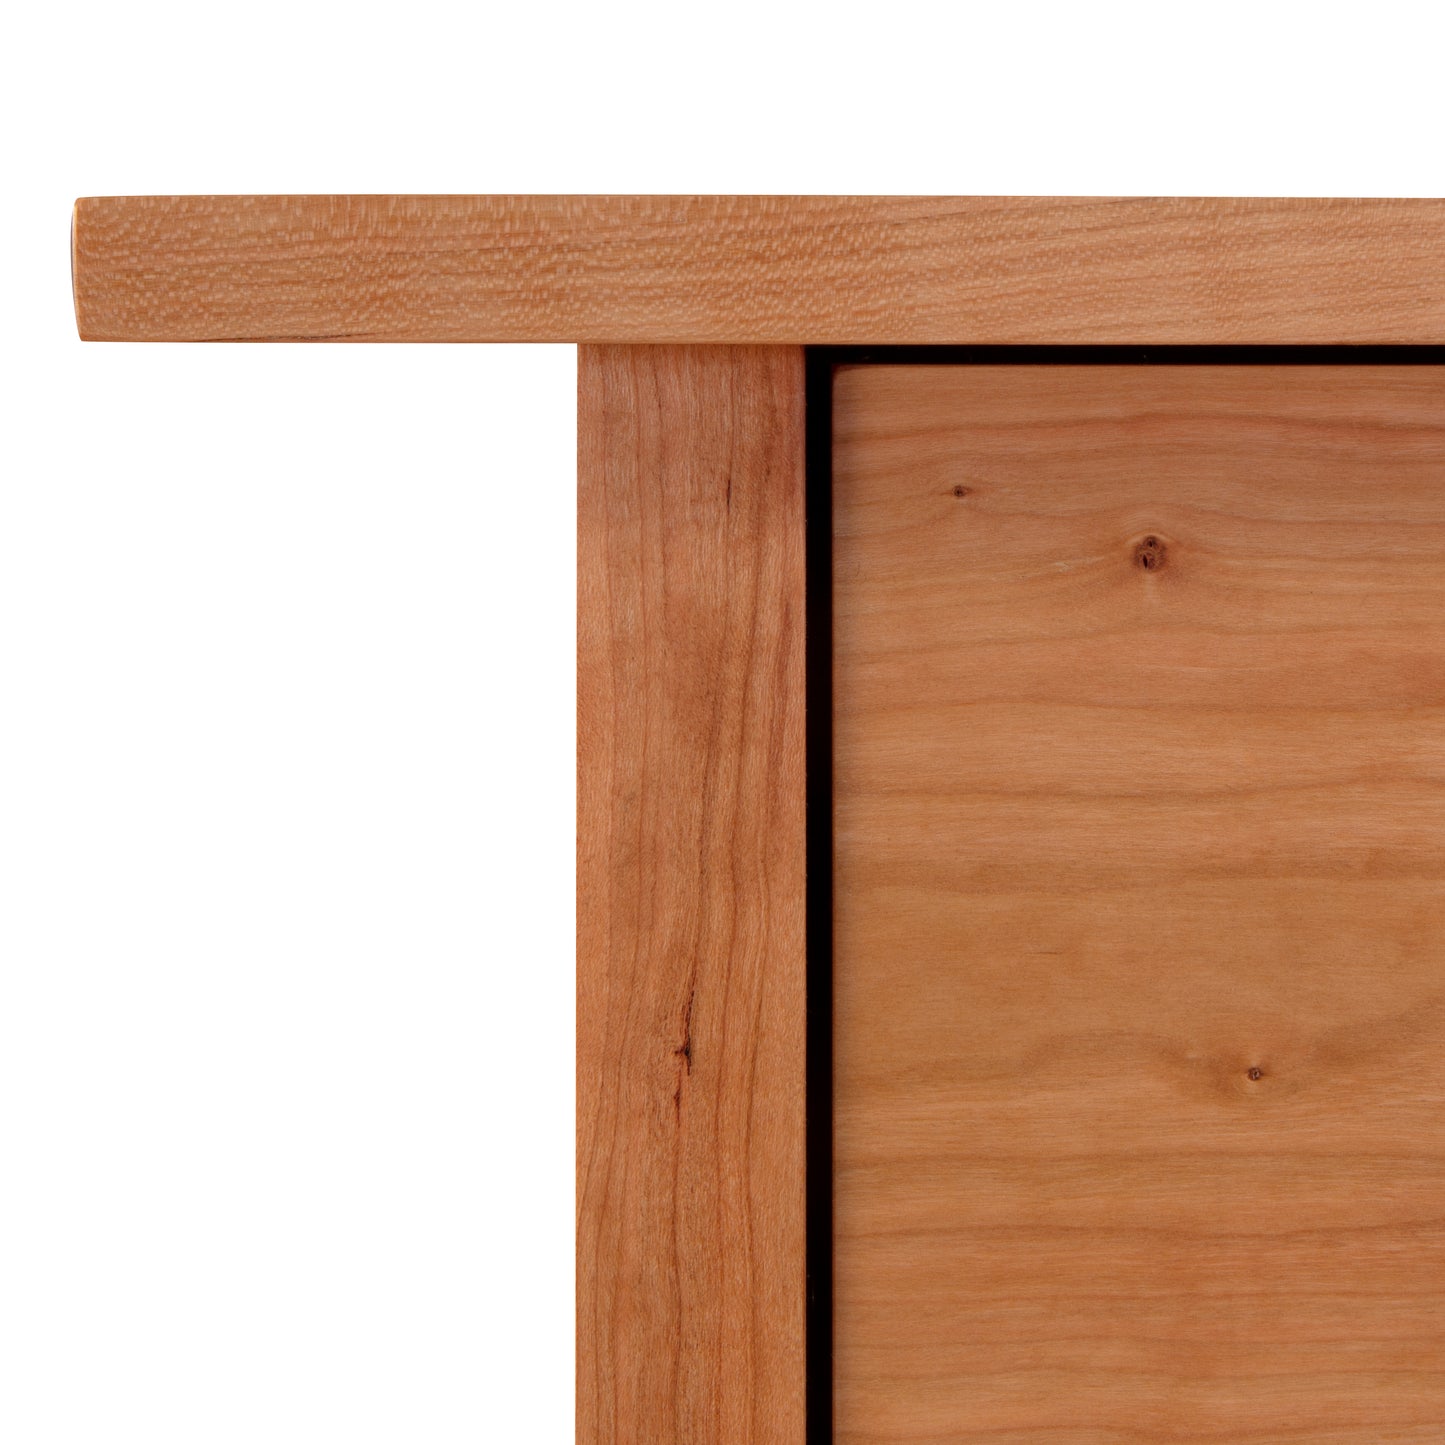 Close-up of a Vermont Furniture Designs Modern Craftsman 6-Drawer Dresser corner showing the texture and grain of the wood, against a white background.